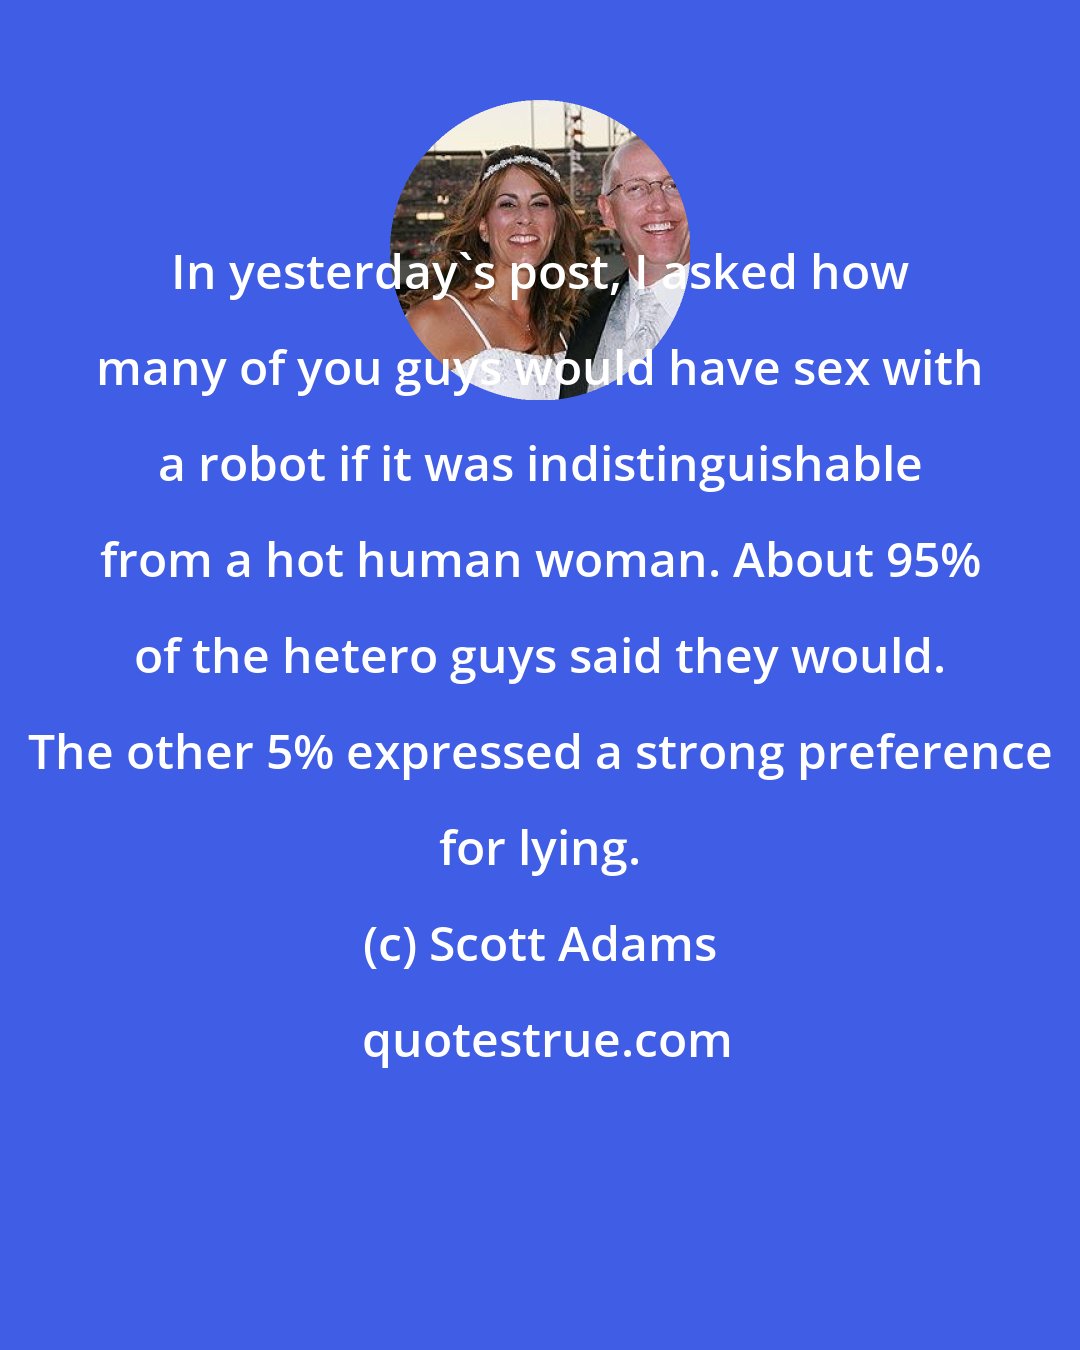 Scott Adams: In yesterday's post, I asked how many of you guys would have sex with a robot if it was indistinguishable from a hot human woman. About 95% of the hetero guys said they would. The other 5% expressed a strong preference for lying.